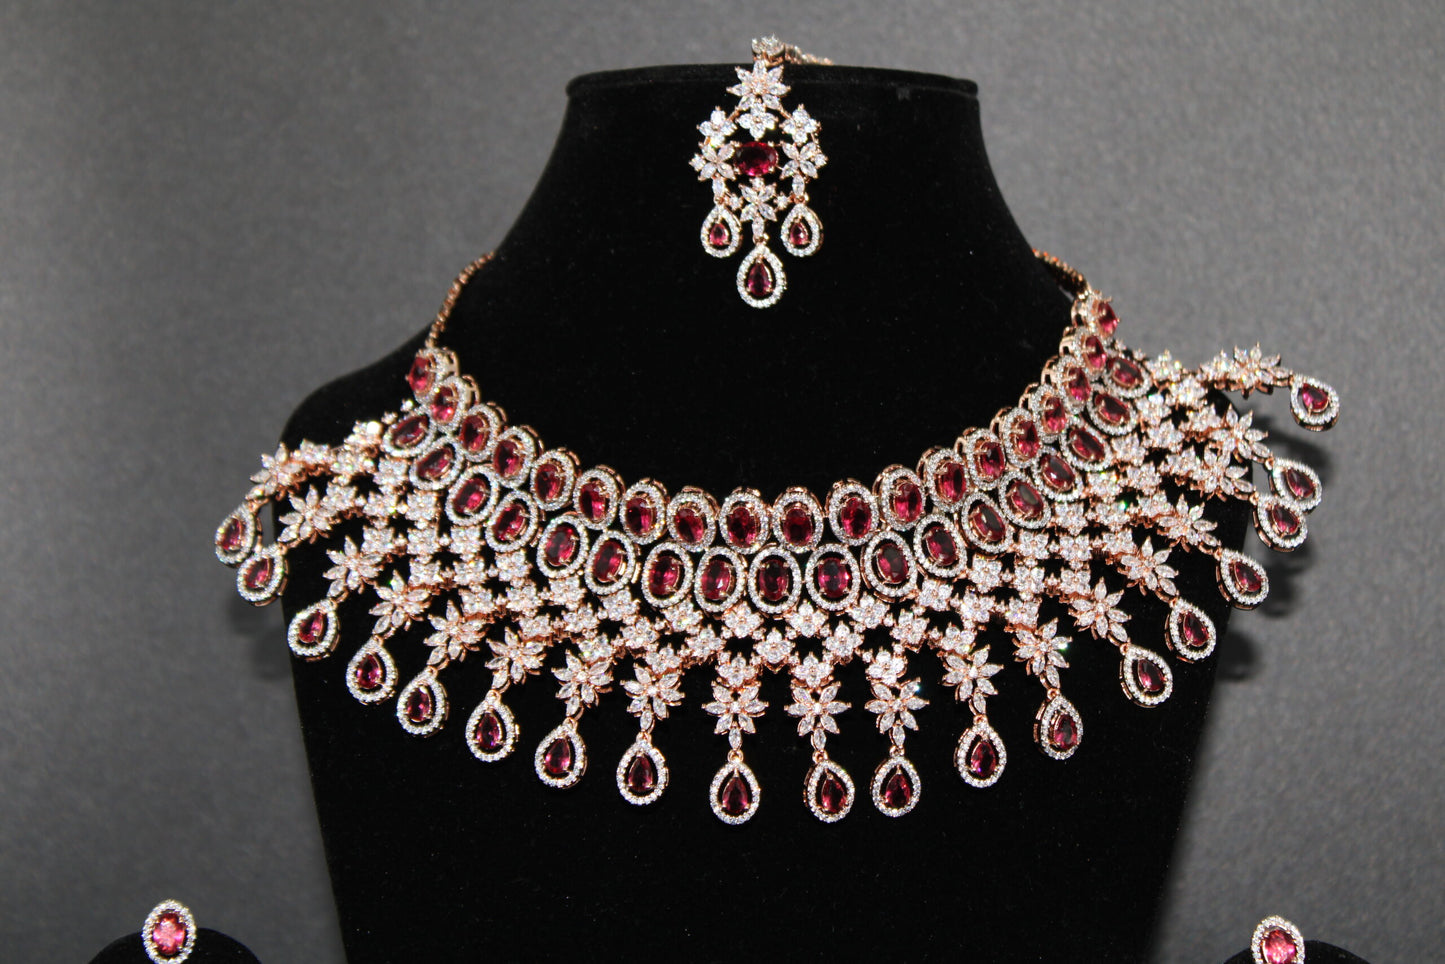 American diamond bridal necklace set with earrings